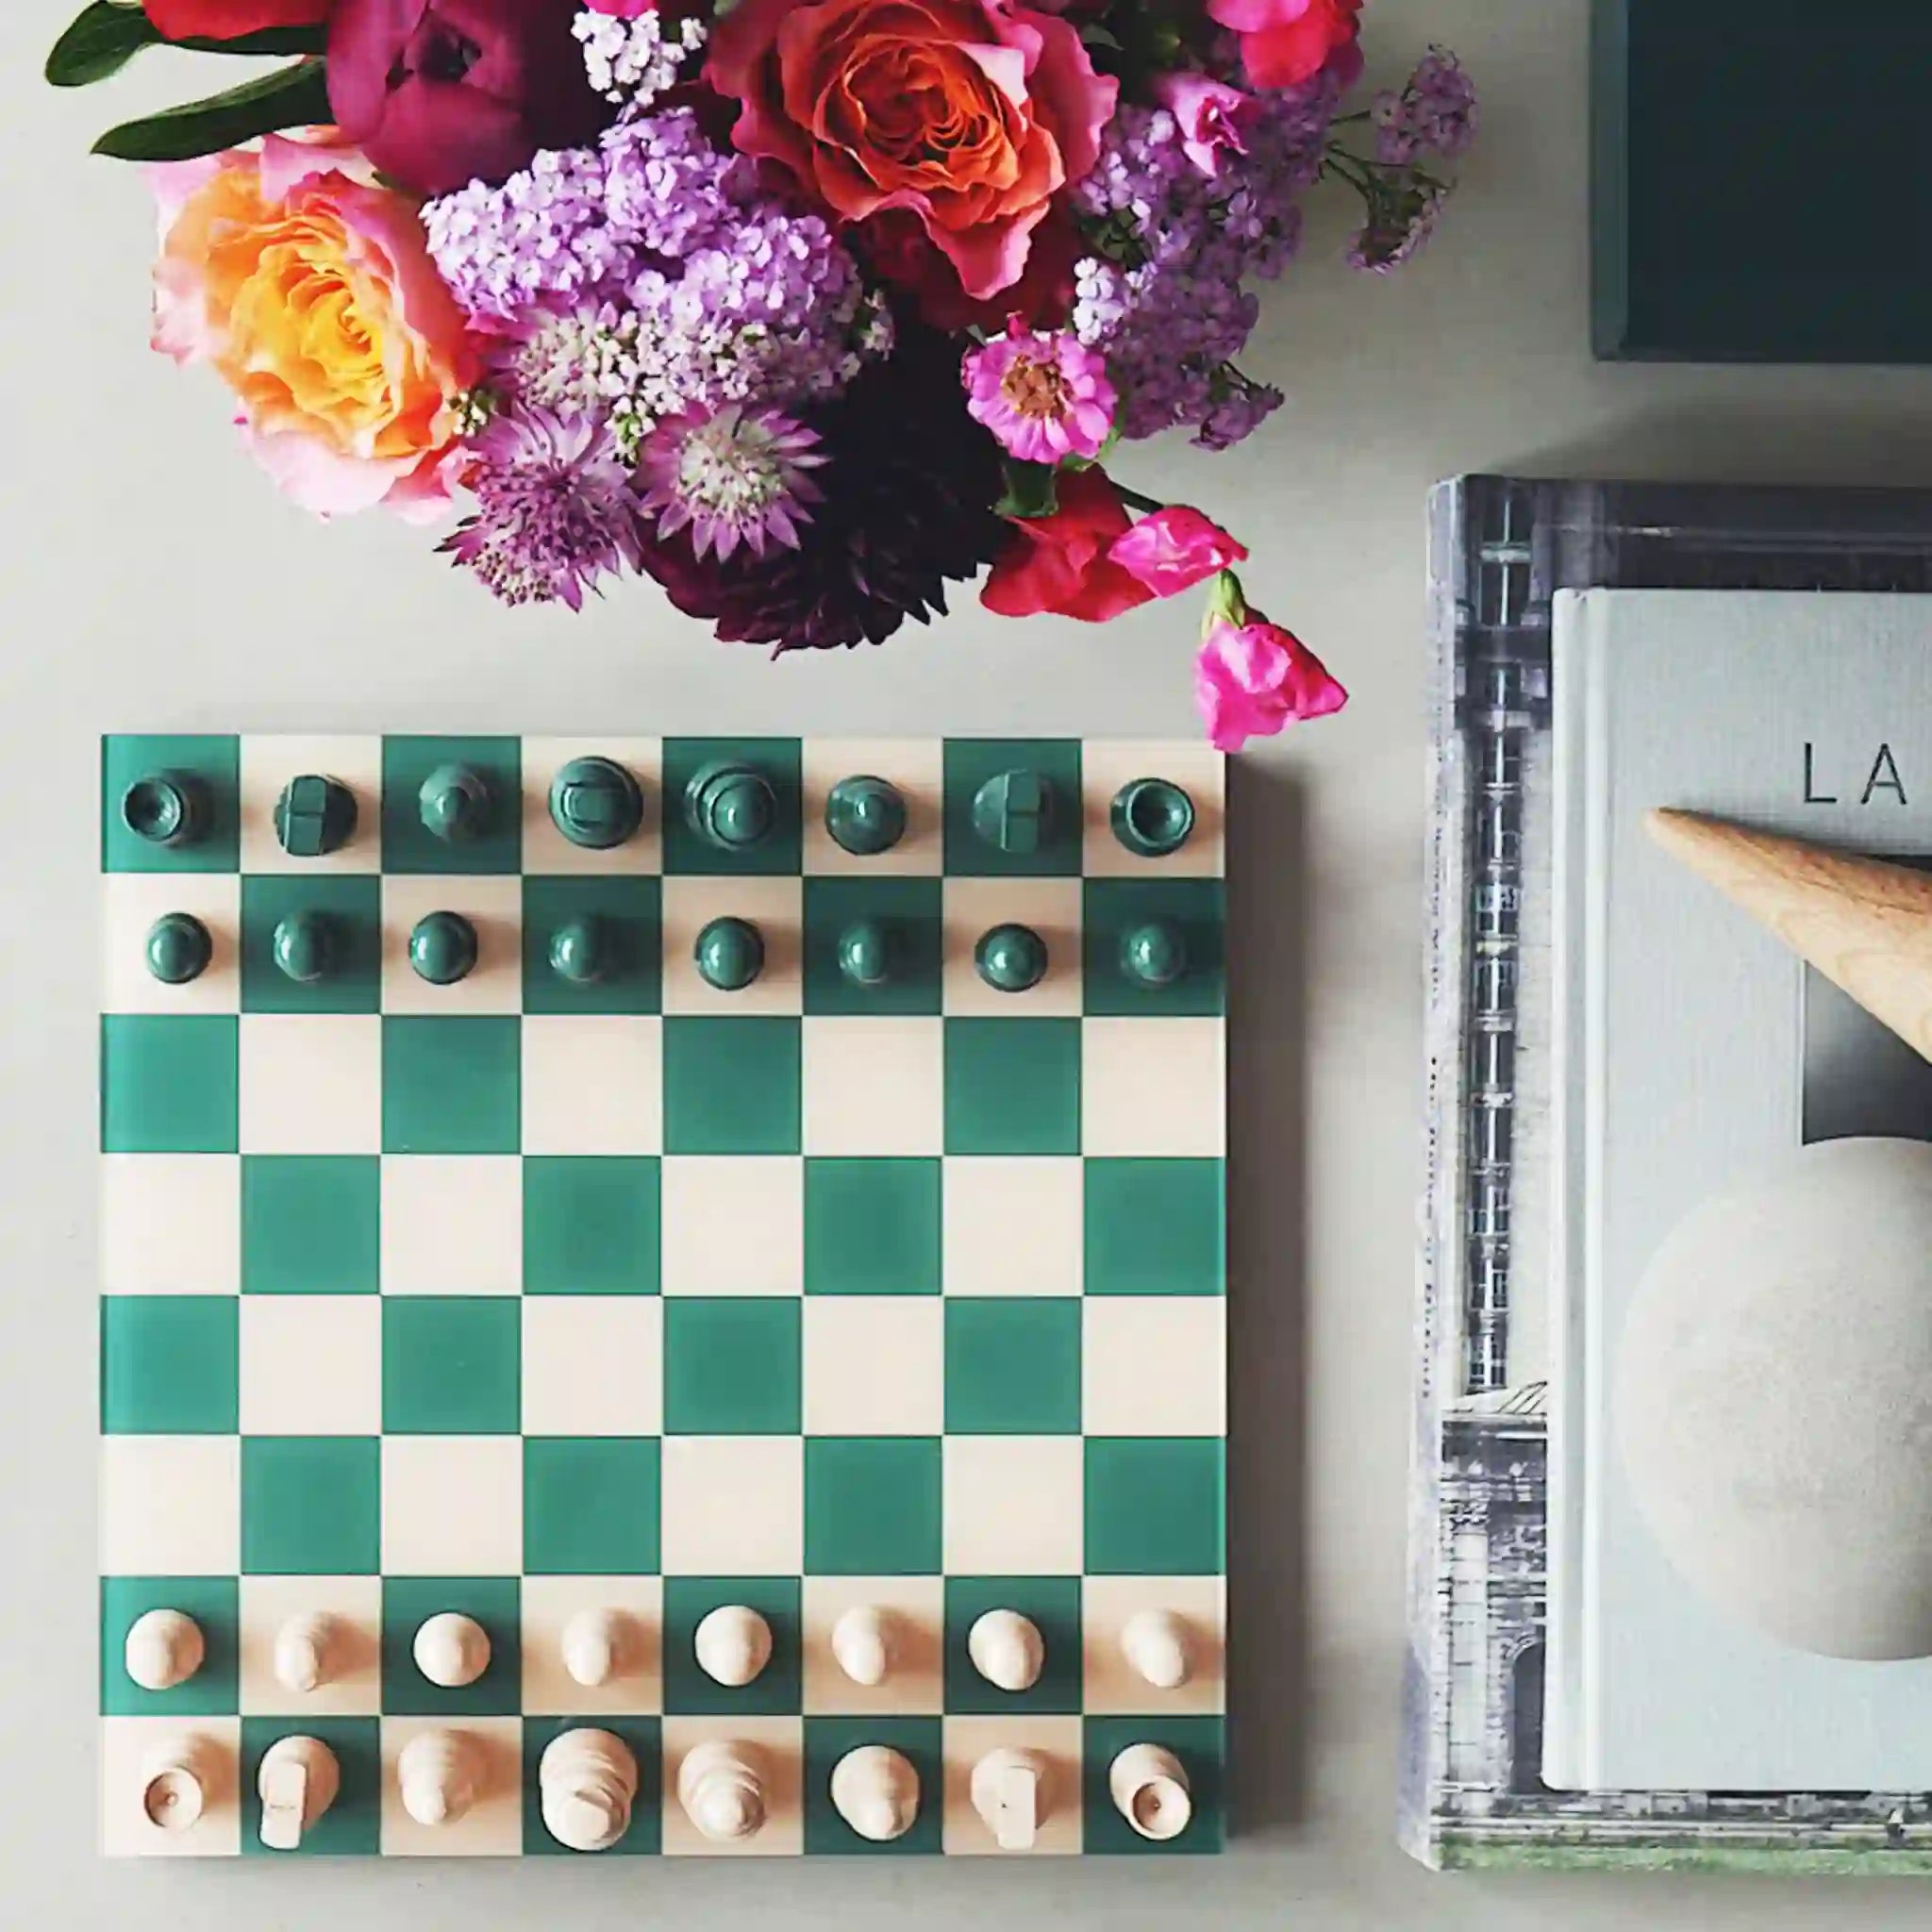 A green and cream colored chess board set staged on a coffee table with flowers and books. 